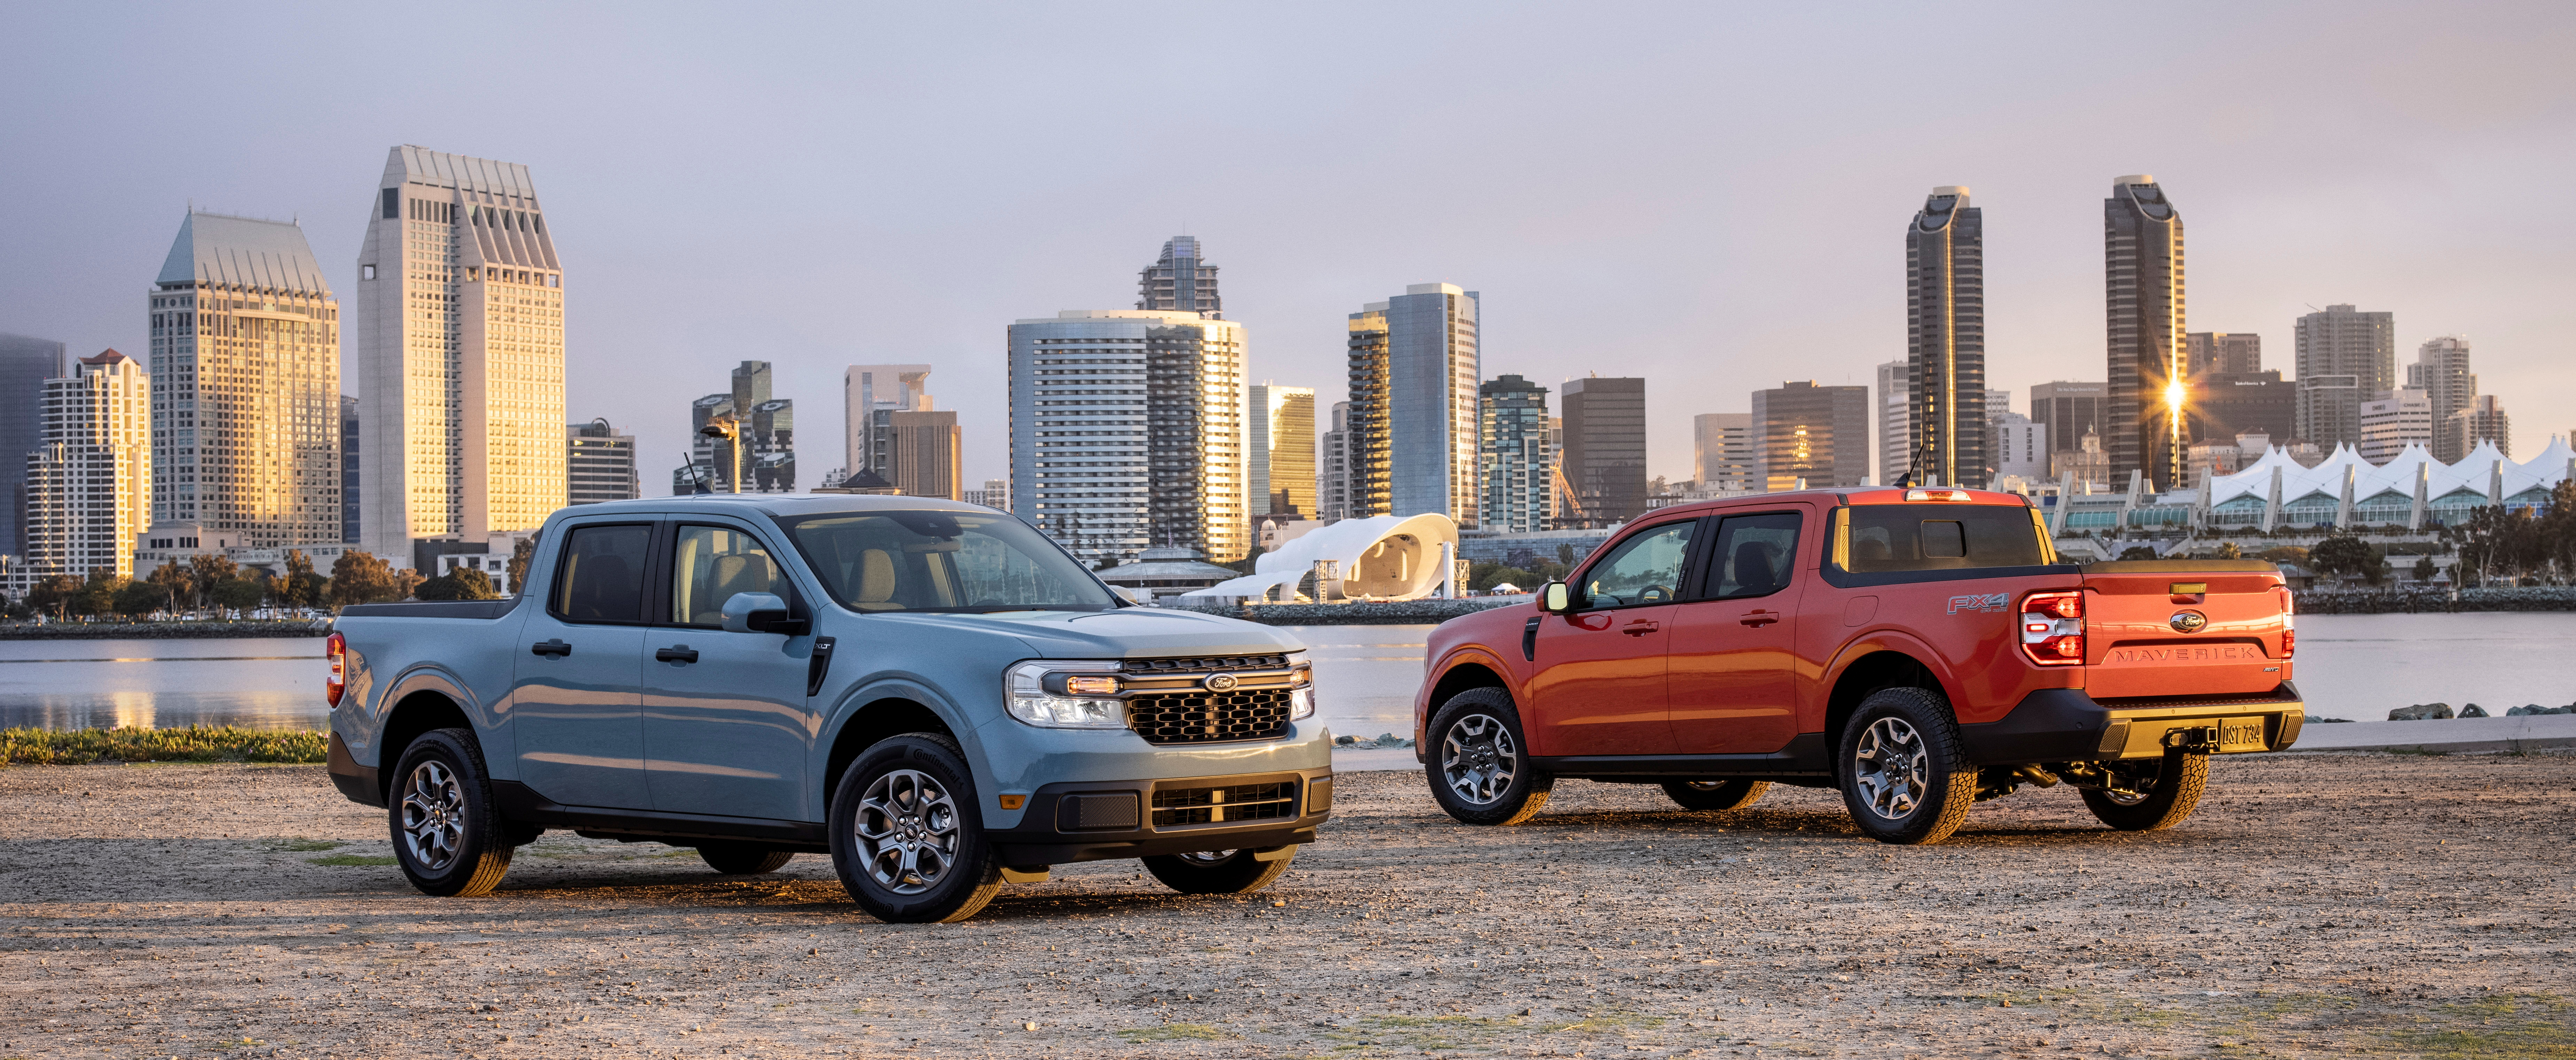 The 2022 Ford Maverick Hybrid and 2L EcoBoost AWD Lariat models, which make their debut in Fall 2021, are seen in an undated photograph